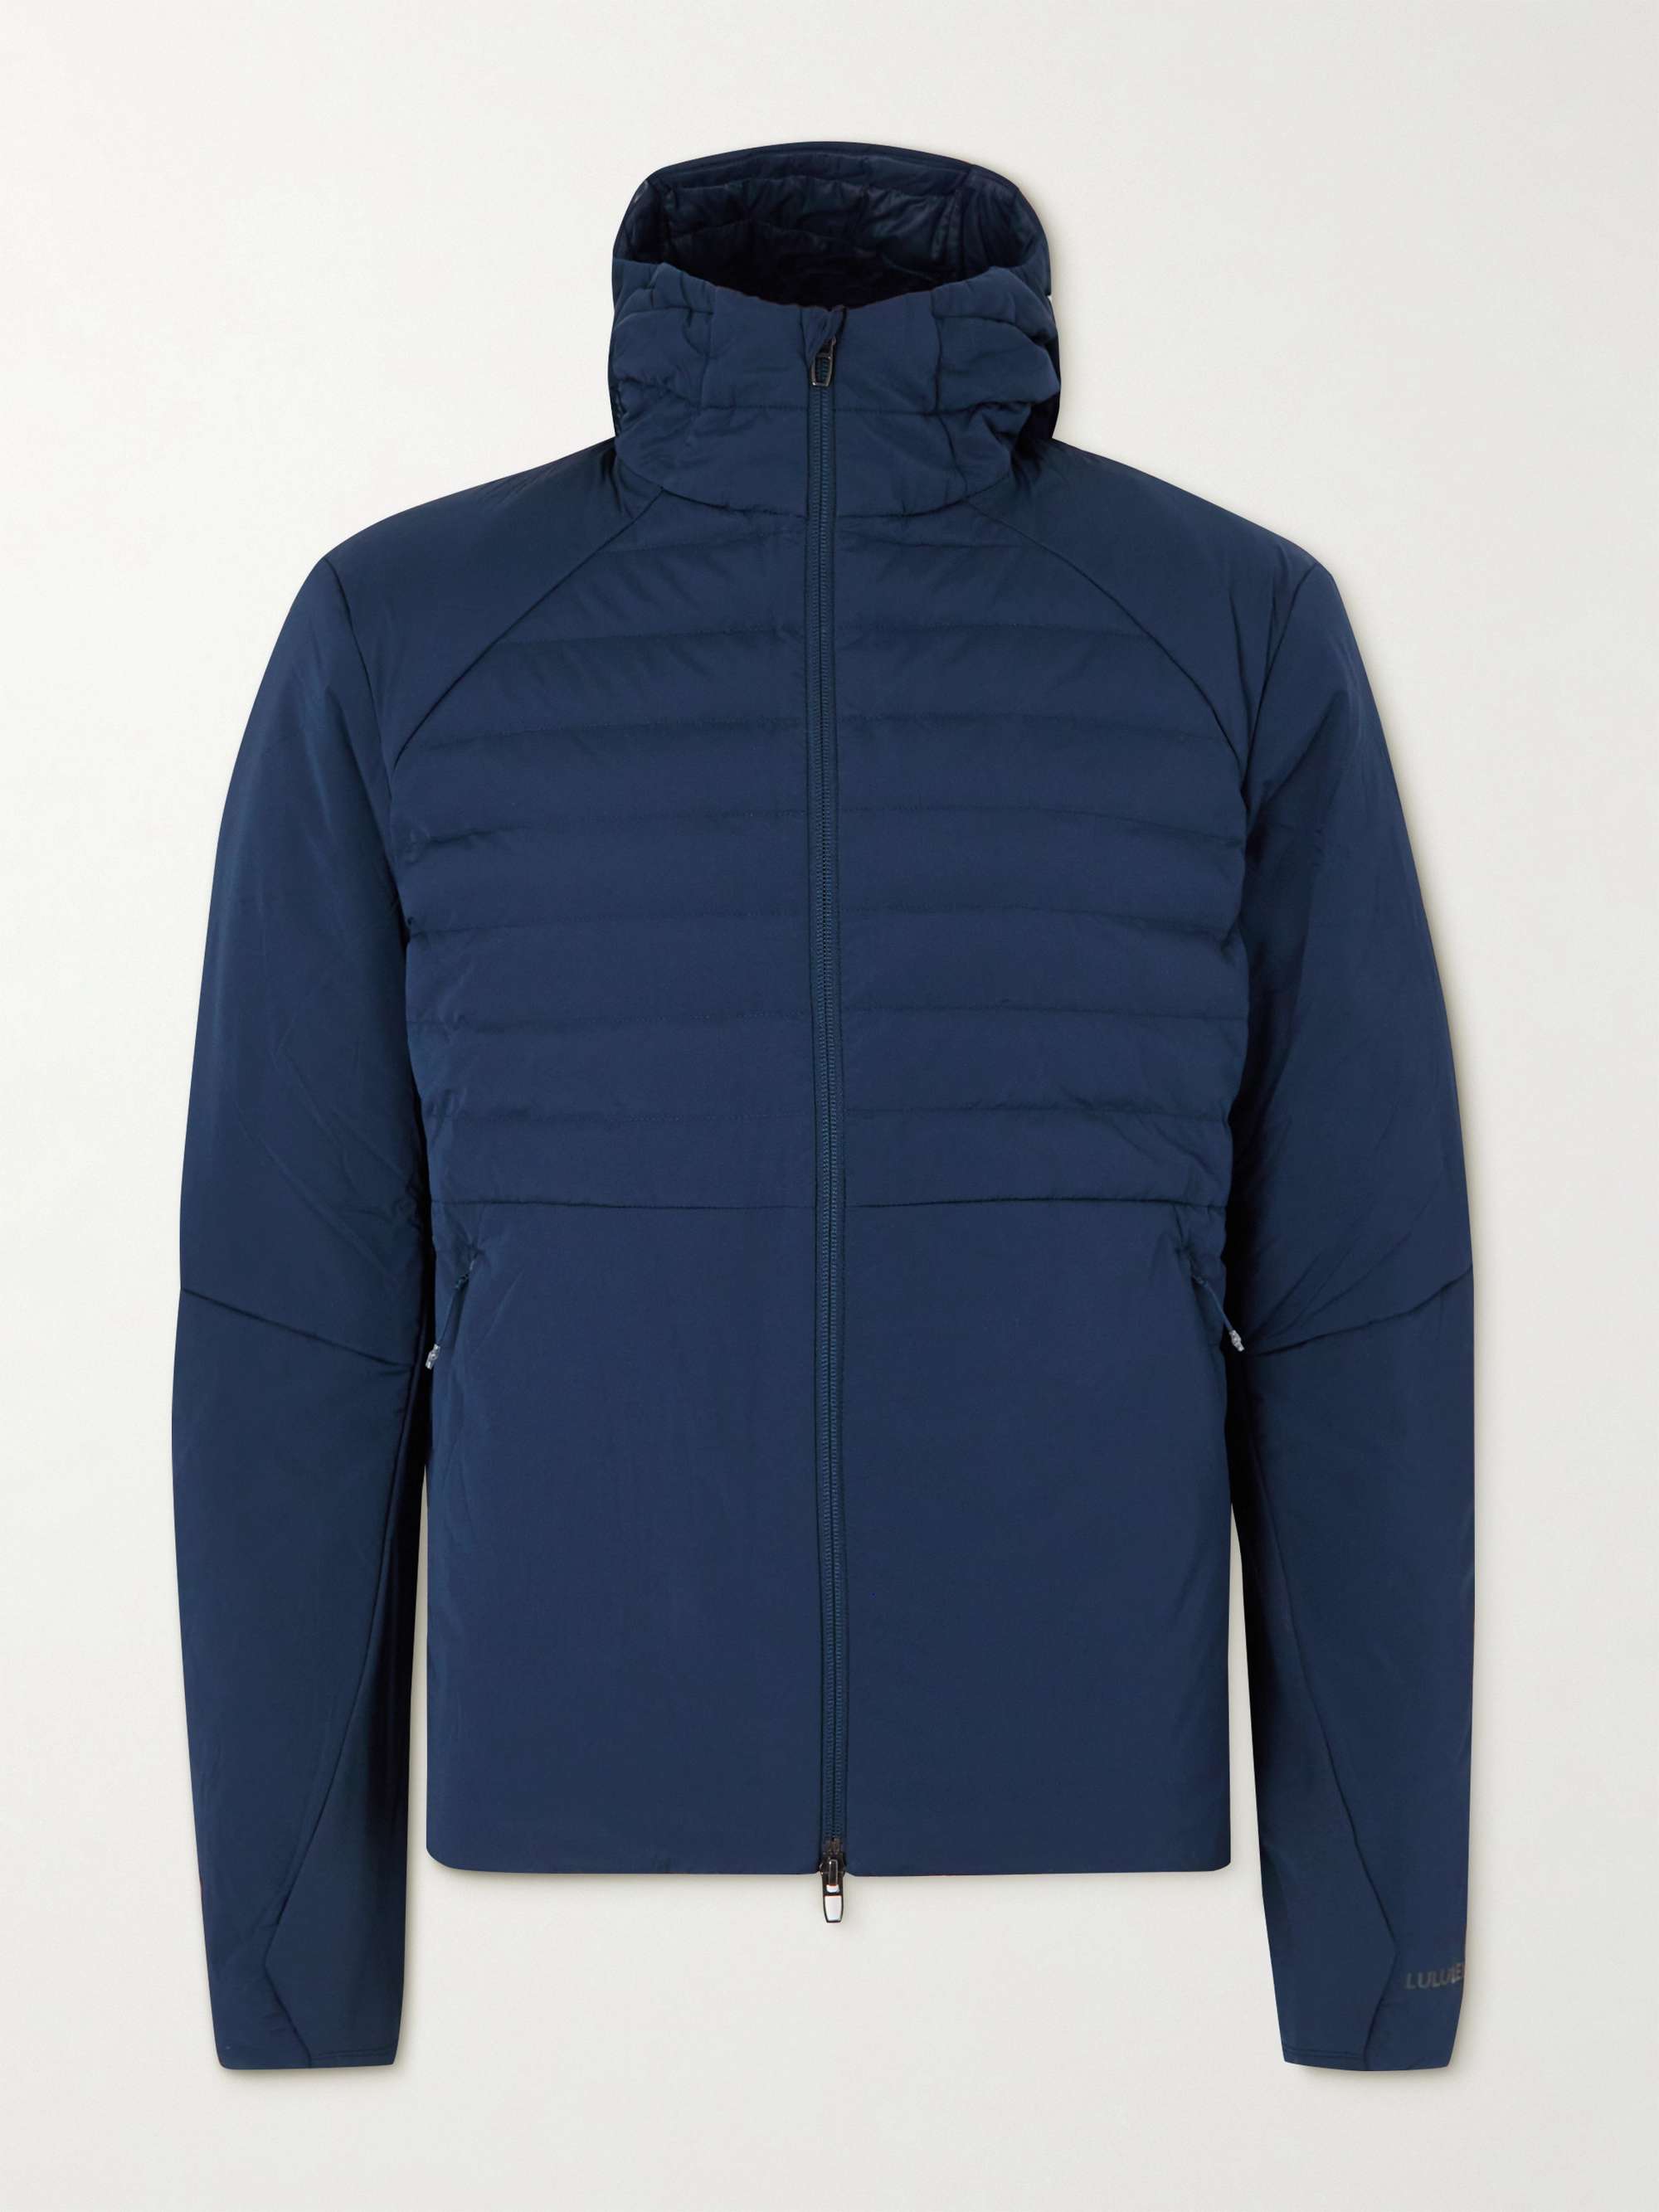 Lululemon athletica Down for It All Jacket